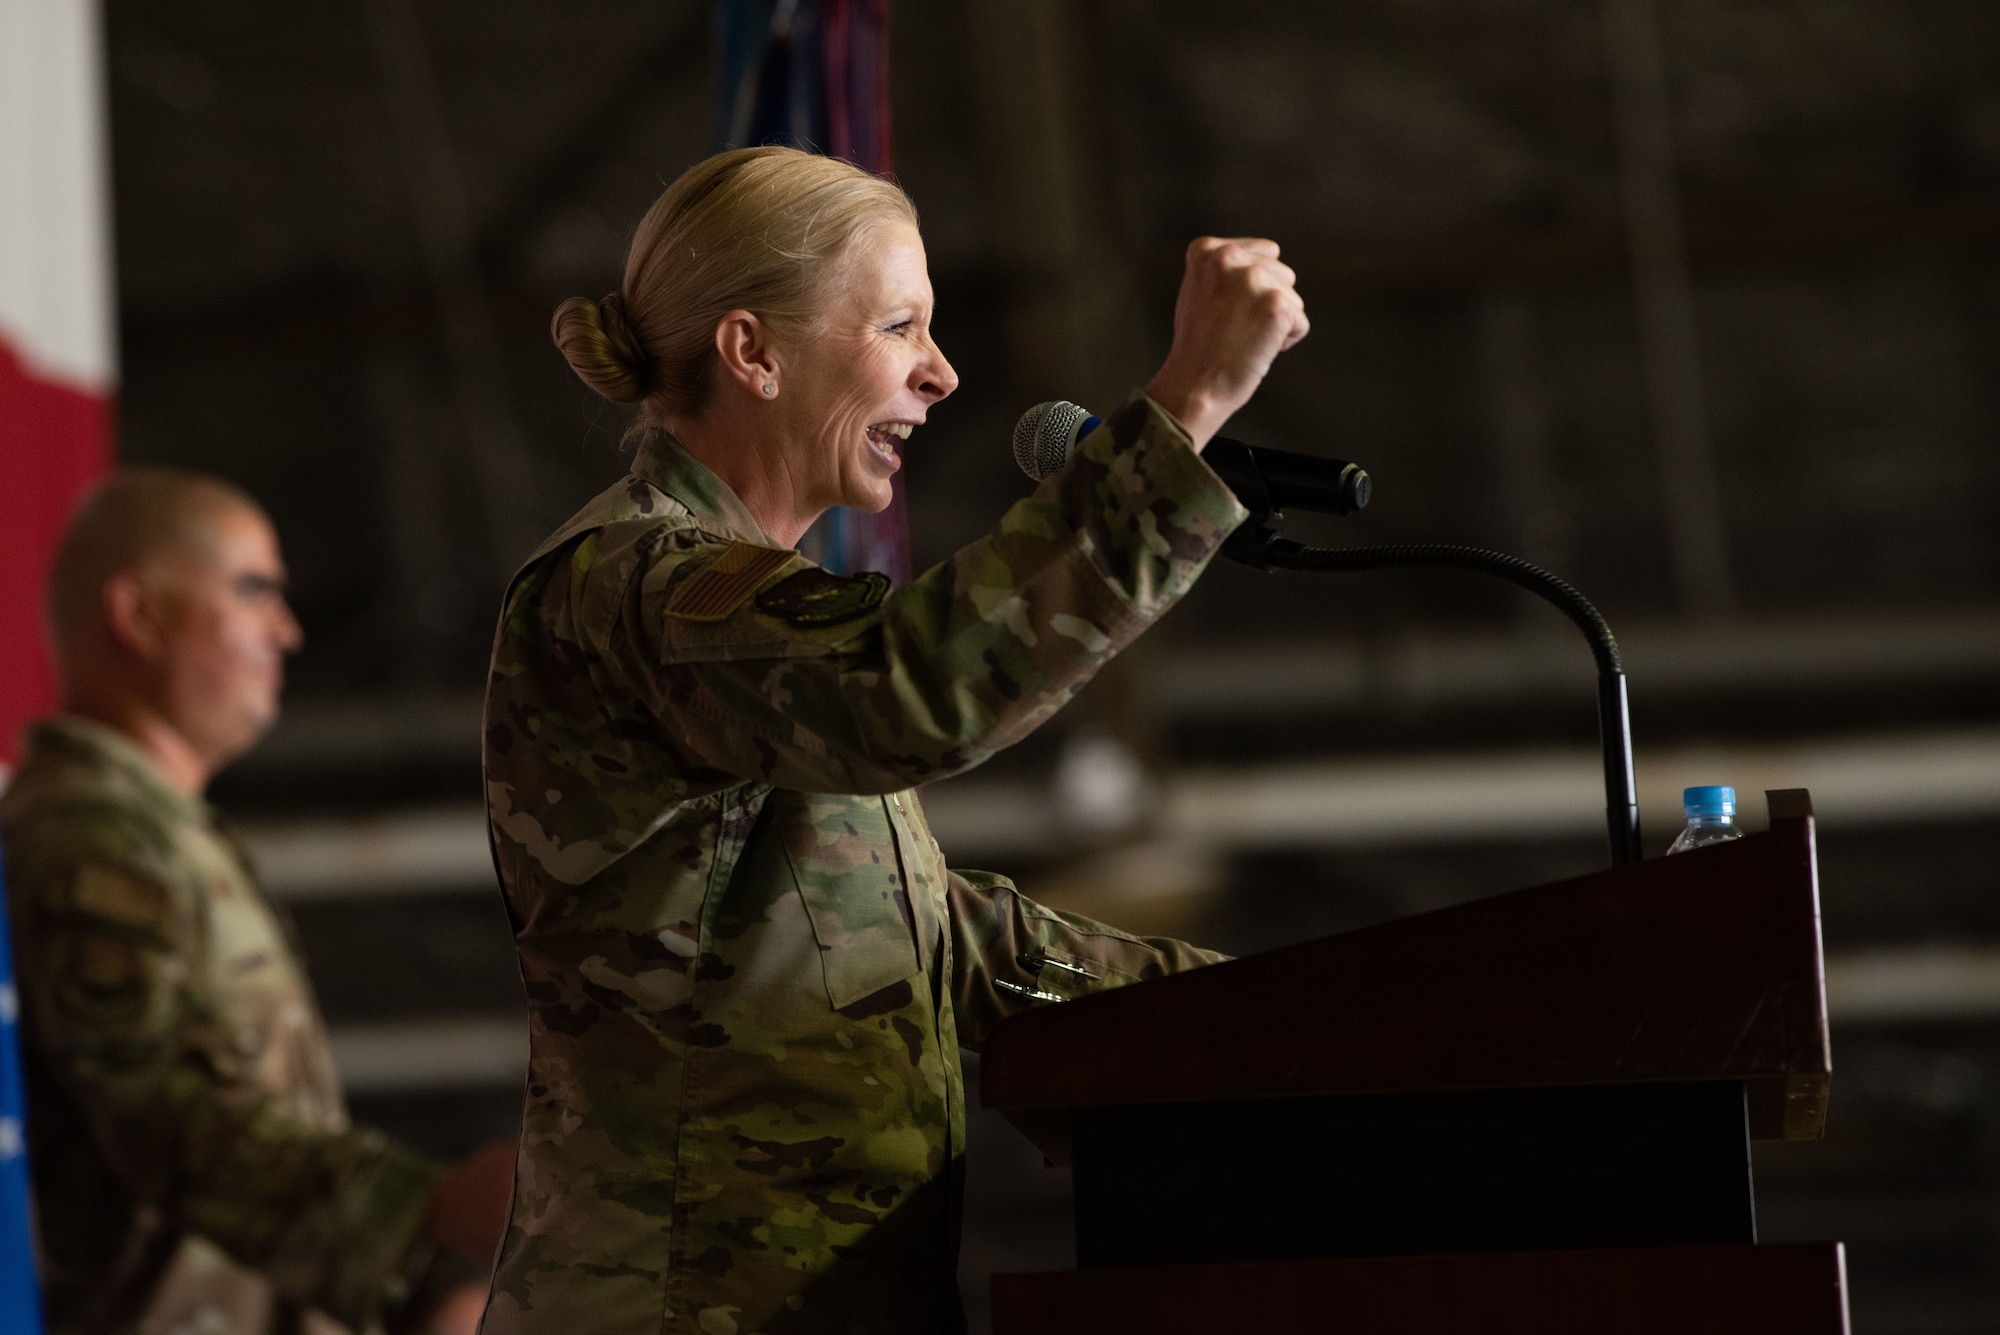 Col. Jonelle Eychner, 51st Mission Support Group outgoing commander, gives closing remarks during the 51st MSG change of command ceremony at Osan Air Base, Republic of Korea, July 13, 2022.